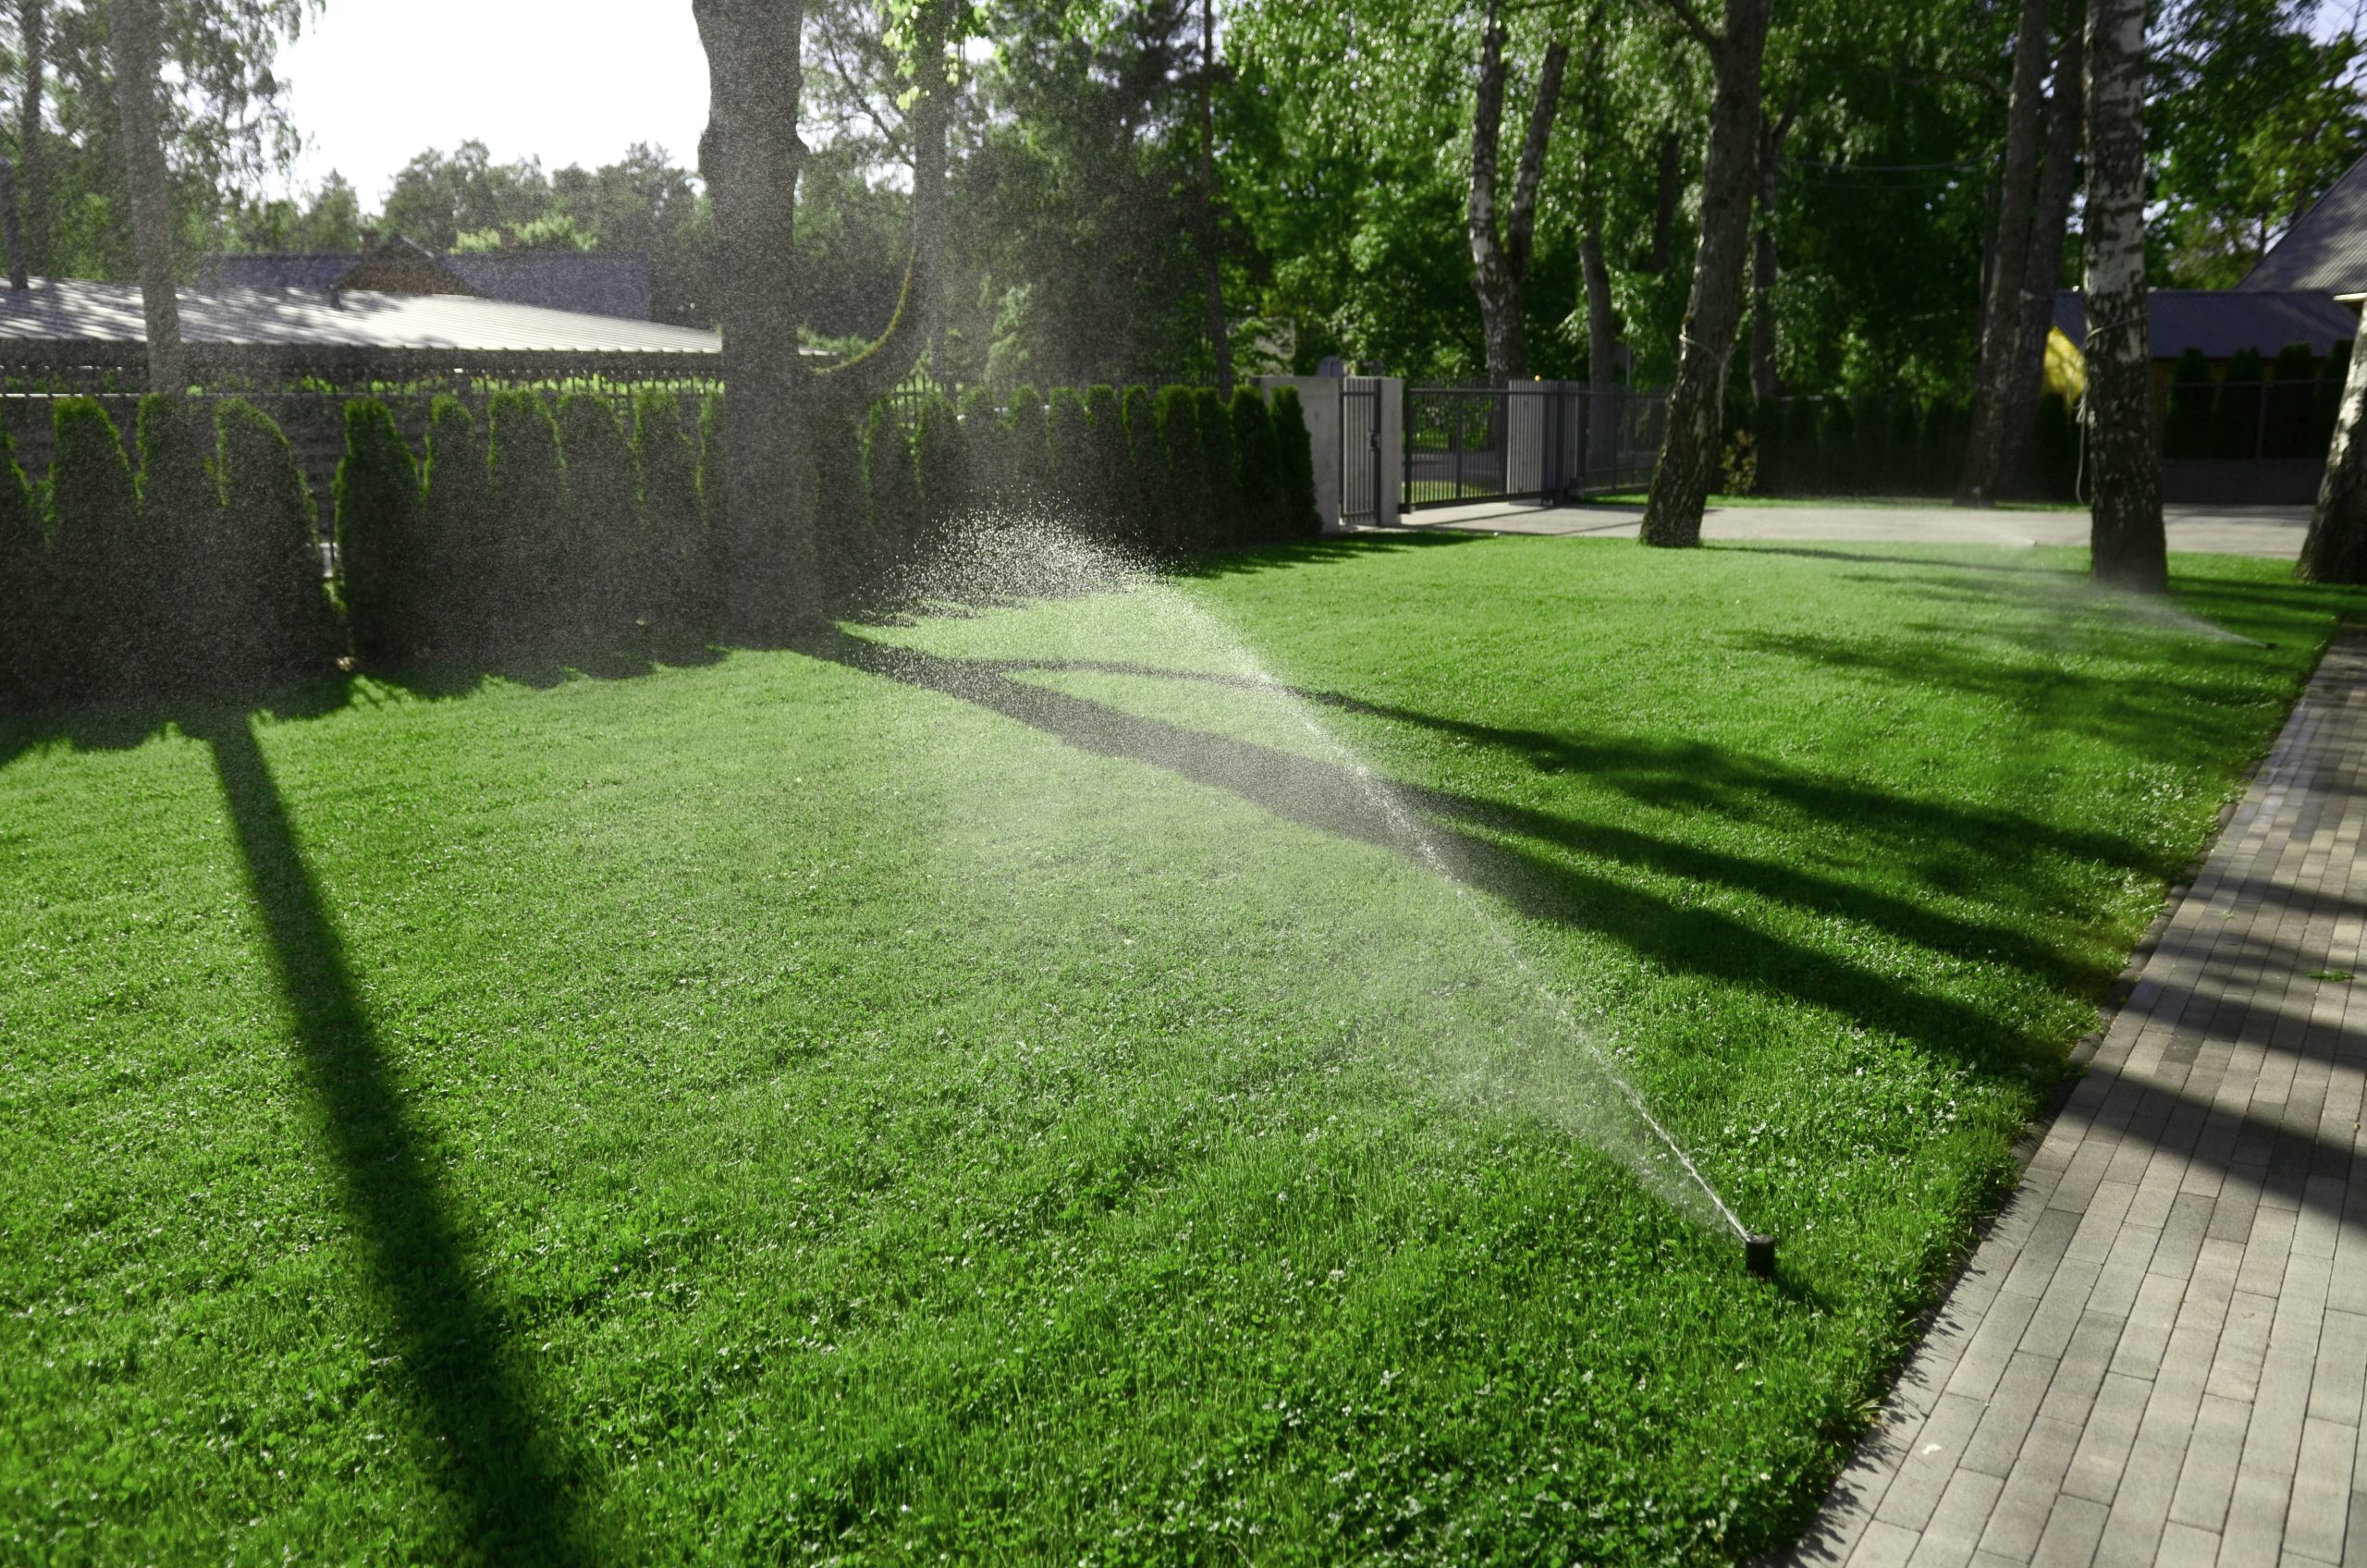 The smart watering system for the lawn.